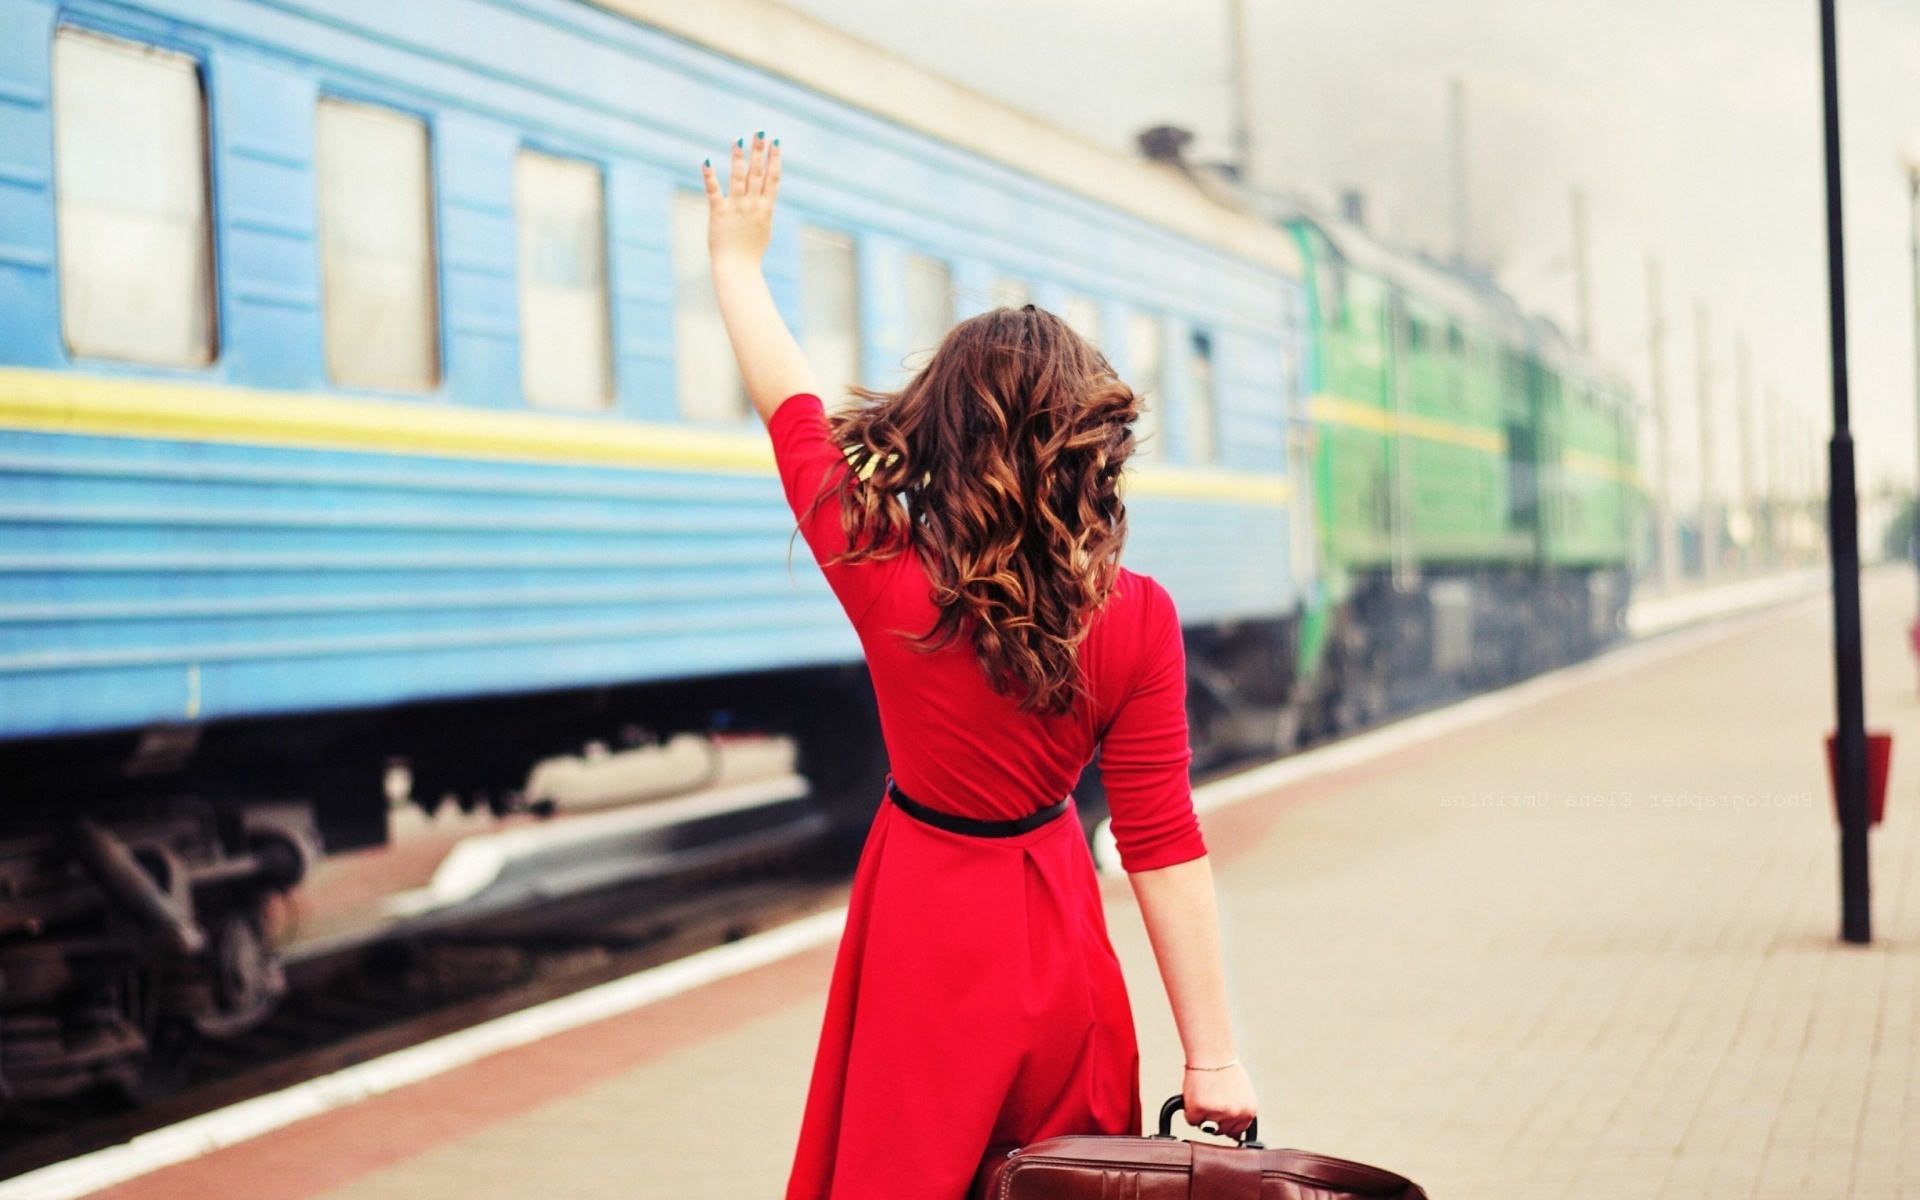 Das Girl traveling from train station Wallpaper 1920x1200